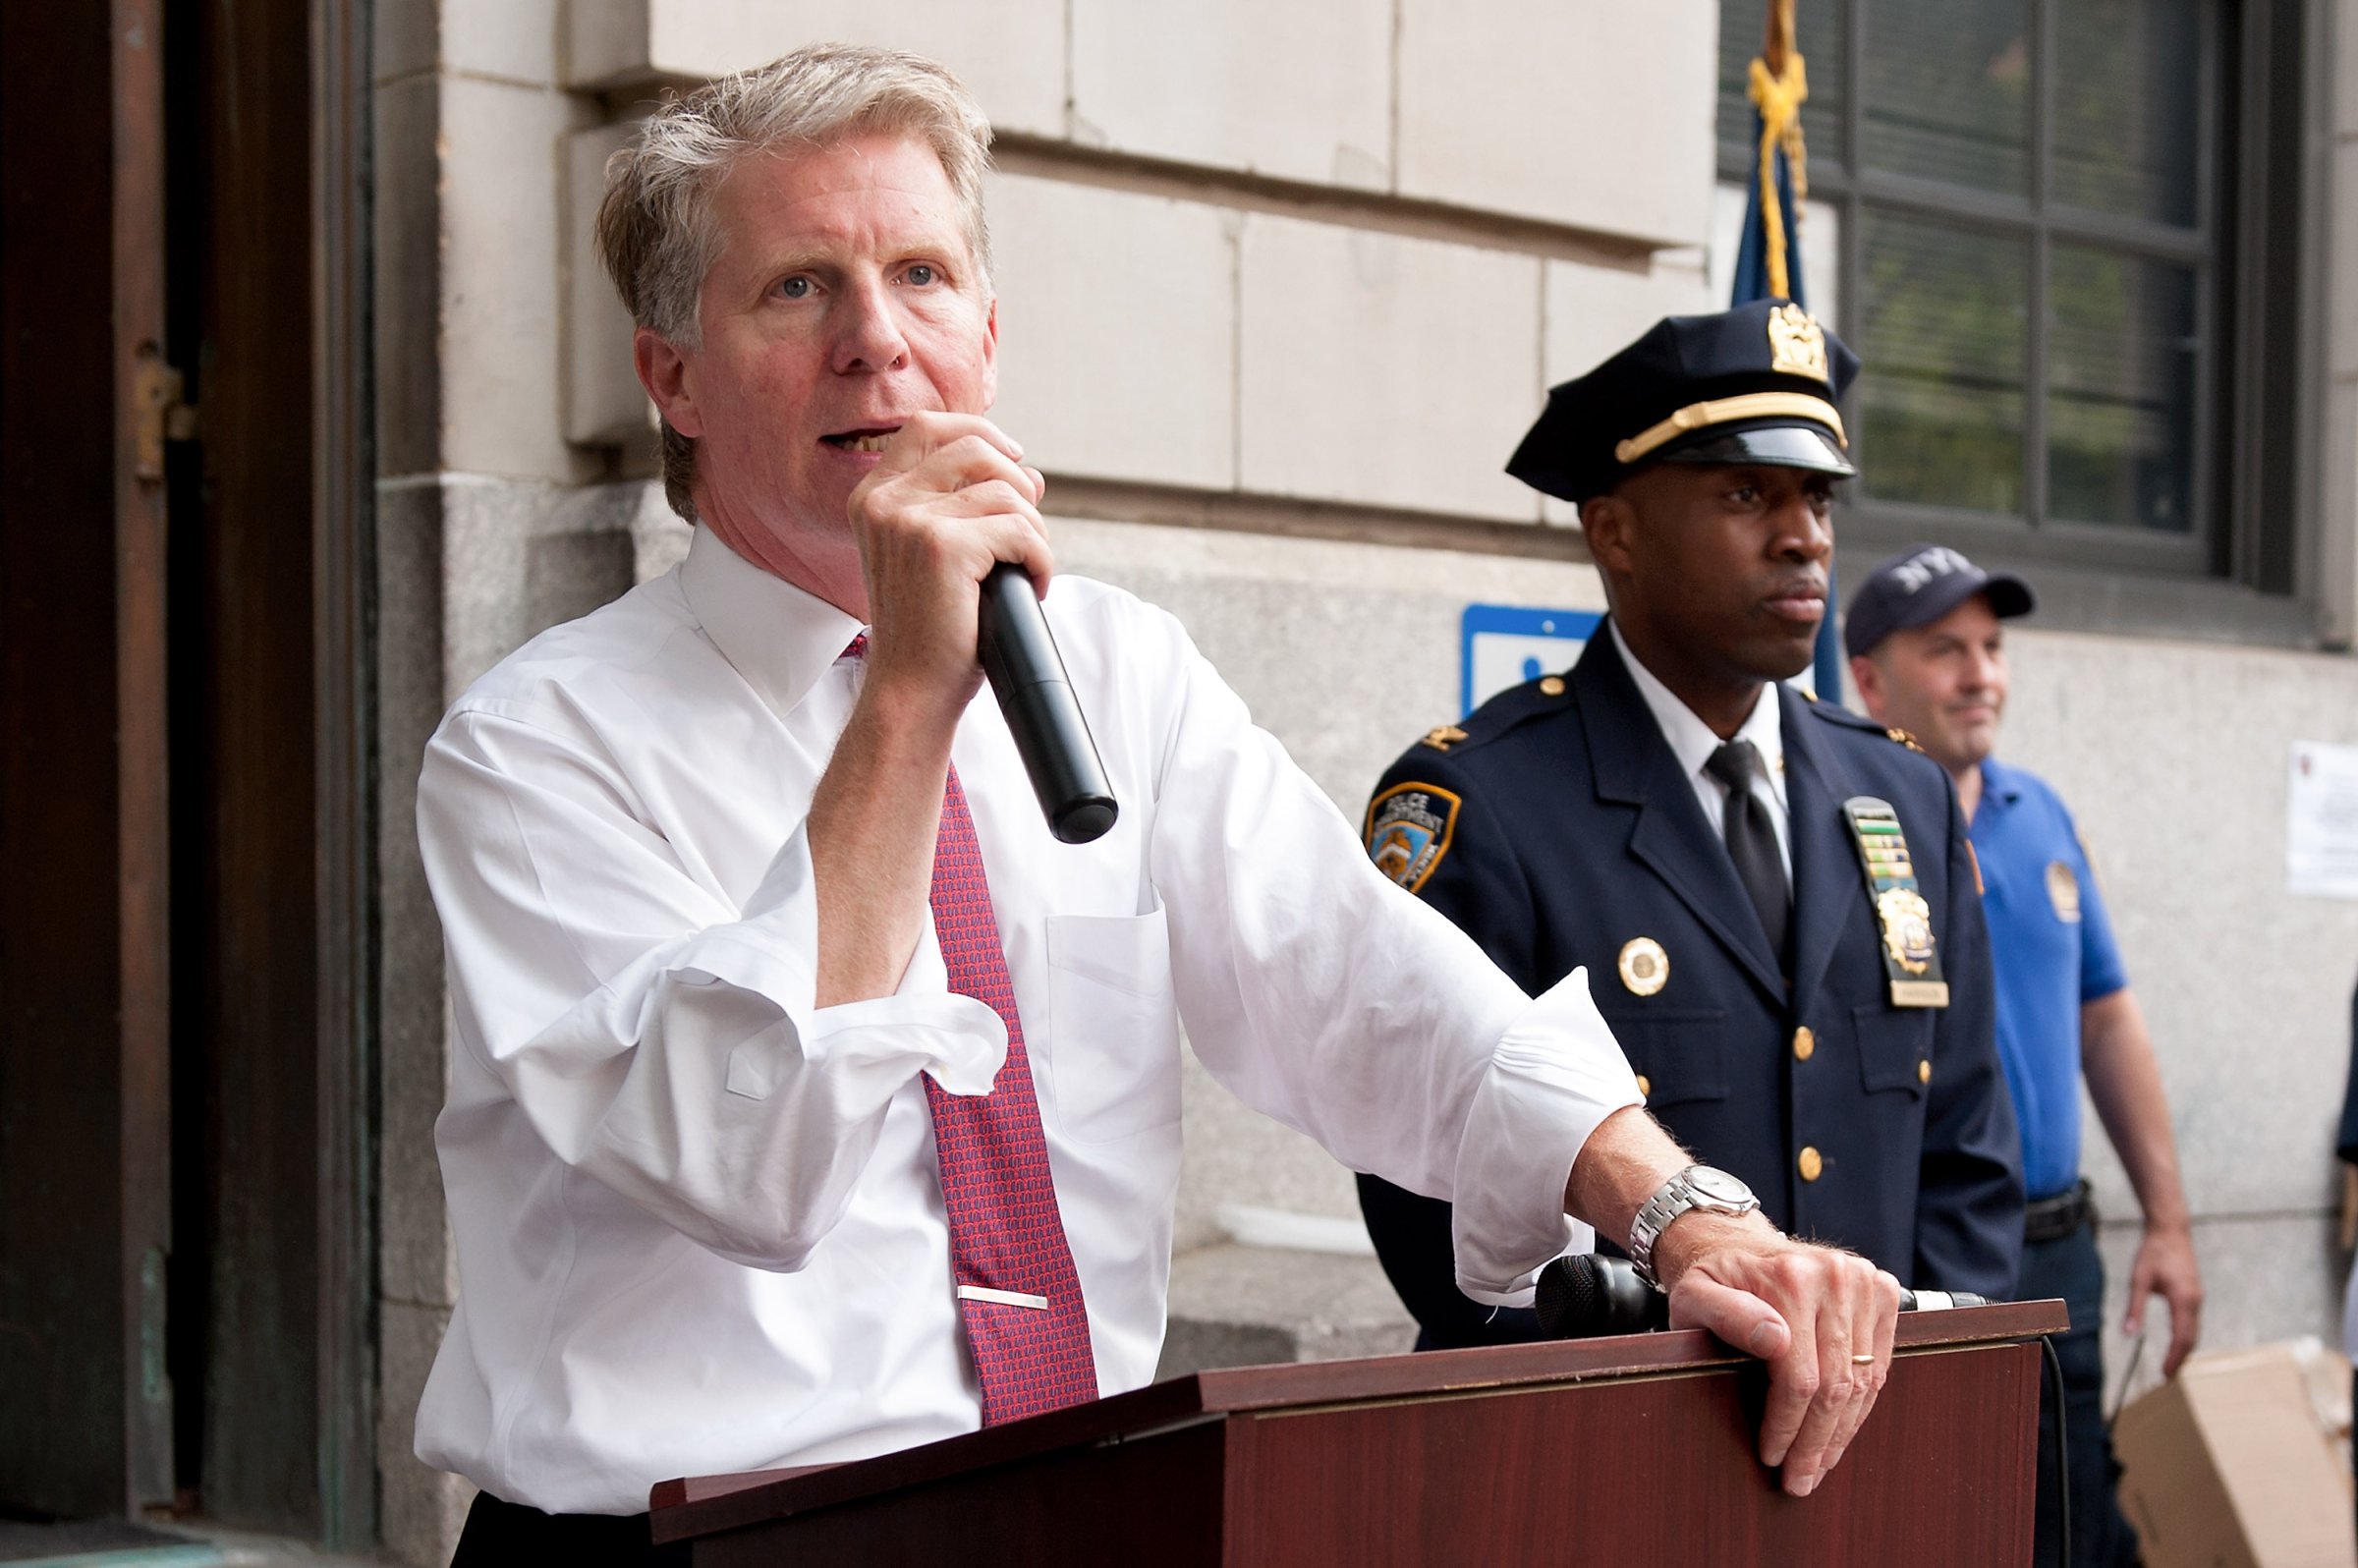 Manhattan District Attorney Cyrus R. Vance, Jr. attends National Night Out on the streets of Manhattan on August 7, 2012 in New York City.